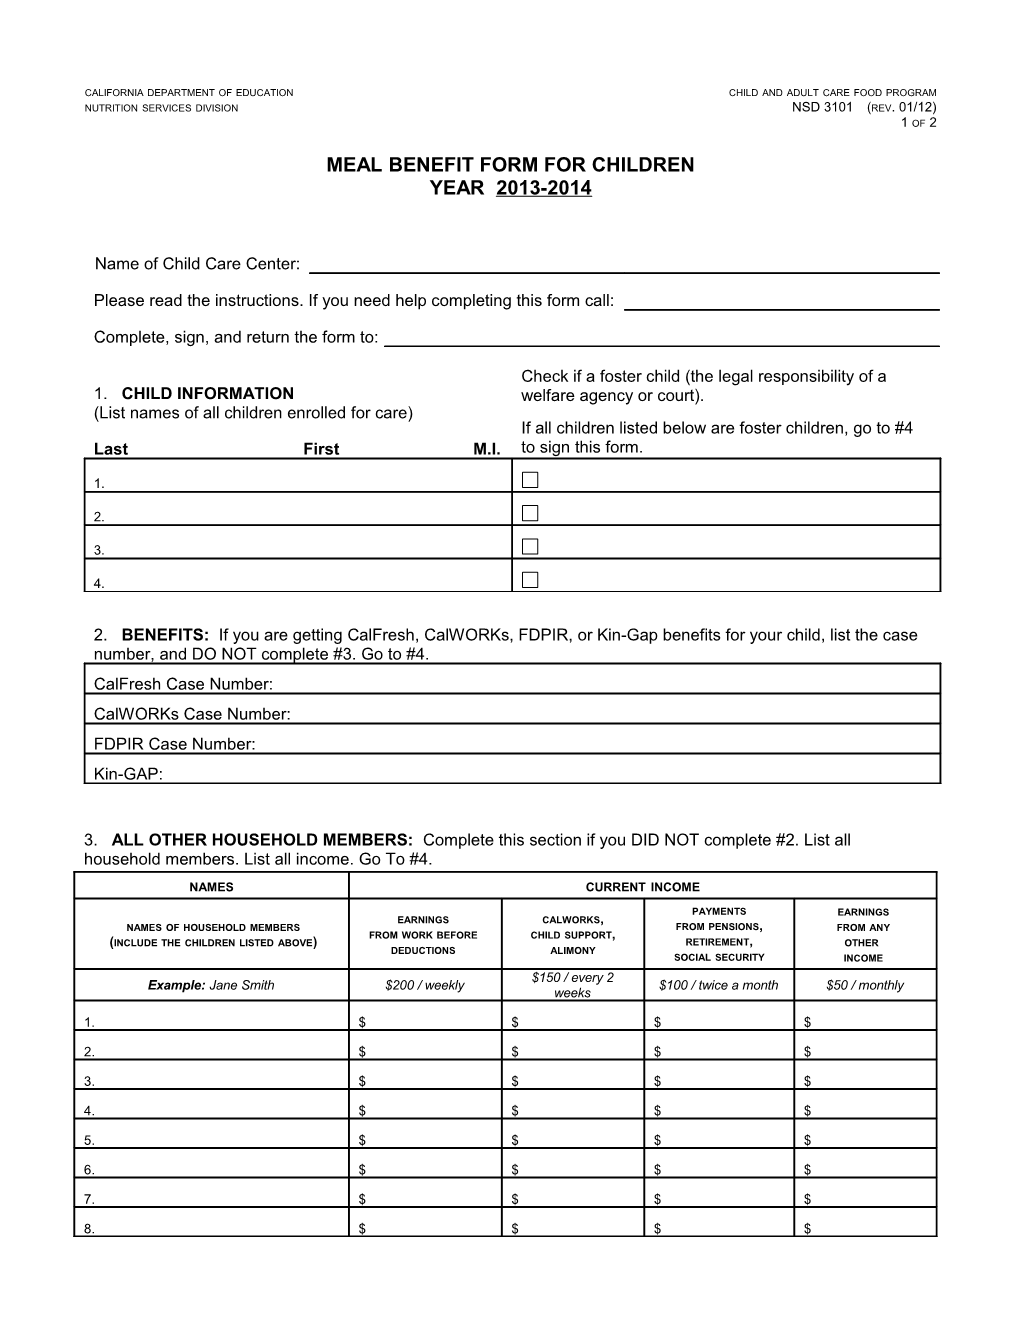 Meal Benefit Form - Child And Adult Care Food Program (CA Dept Of Education)